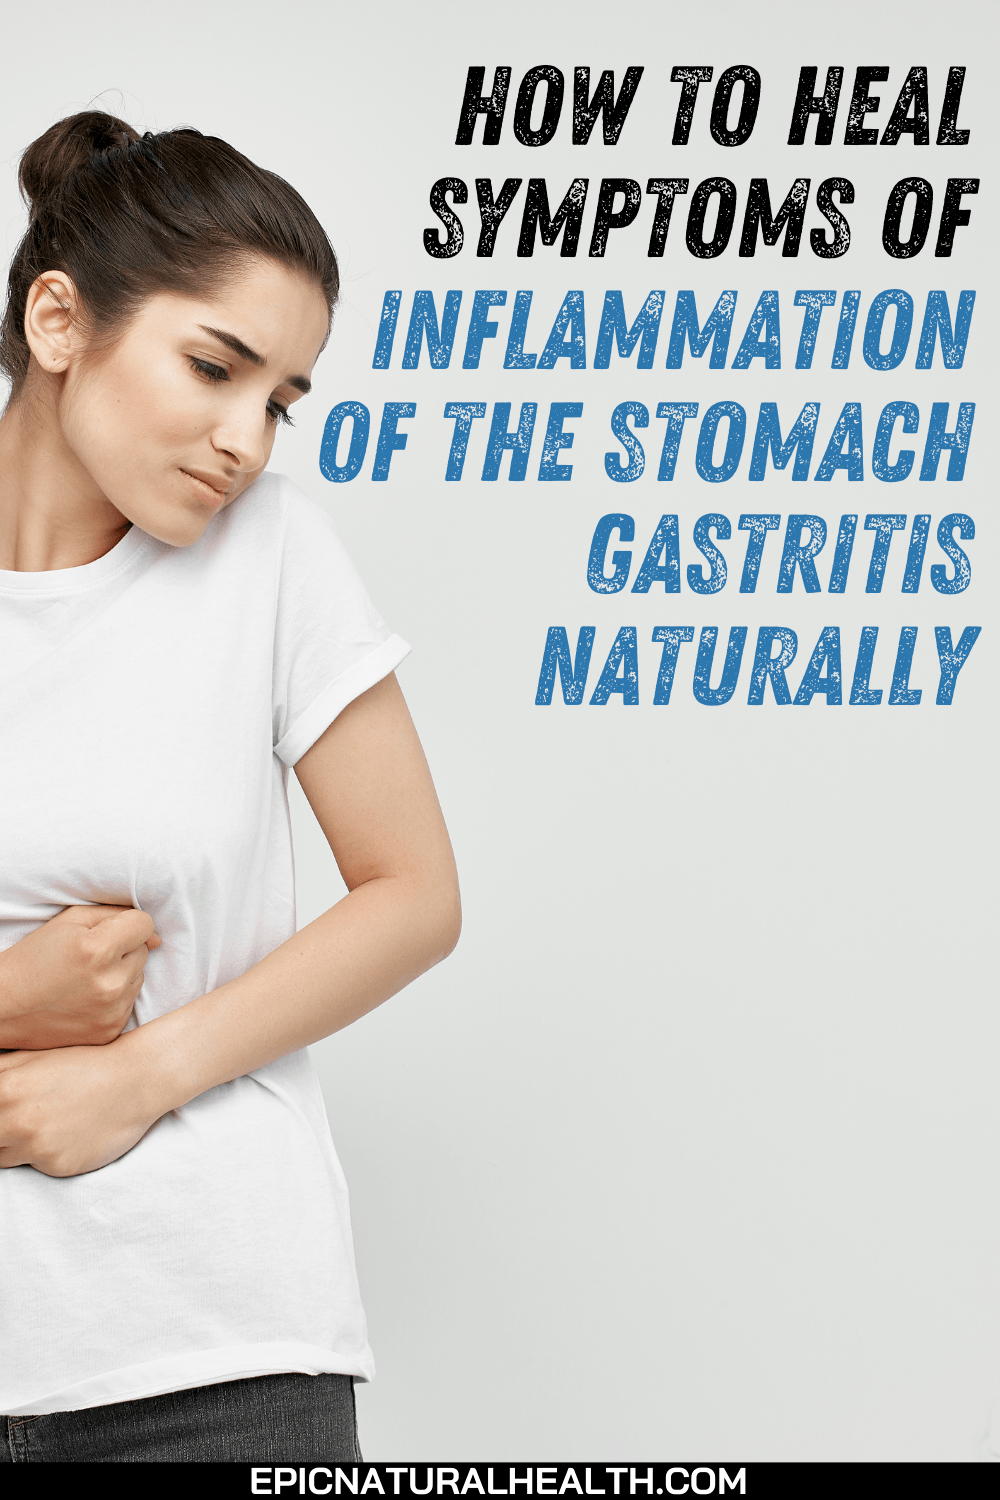 how to heal symptoms of inflammaton of the stomach gastritis naturally